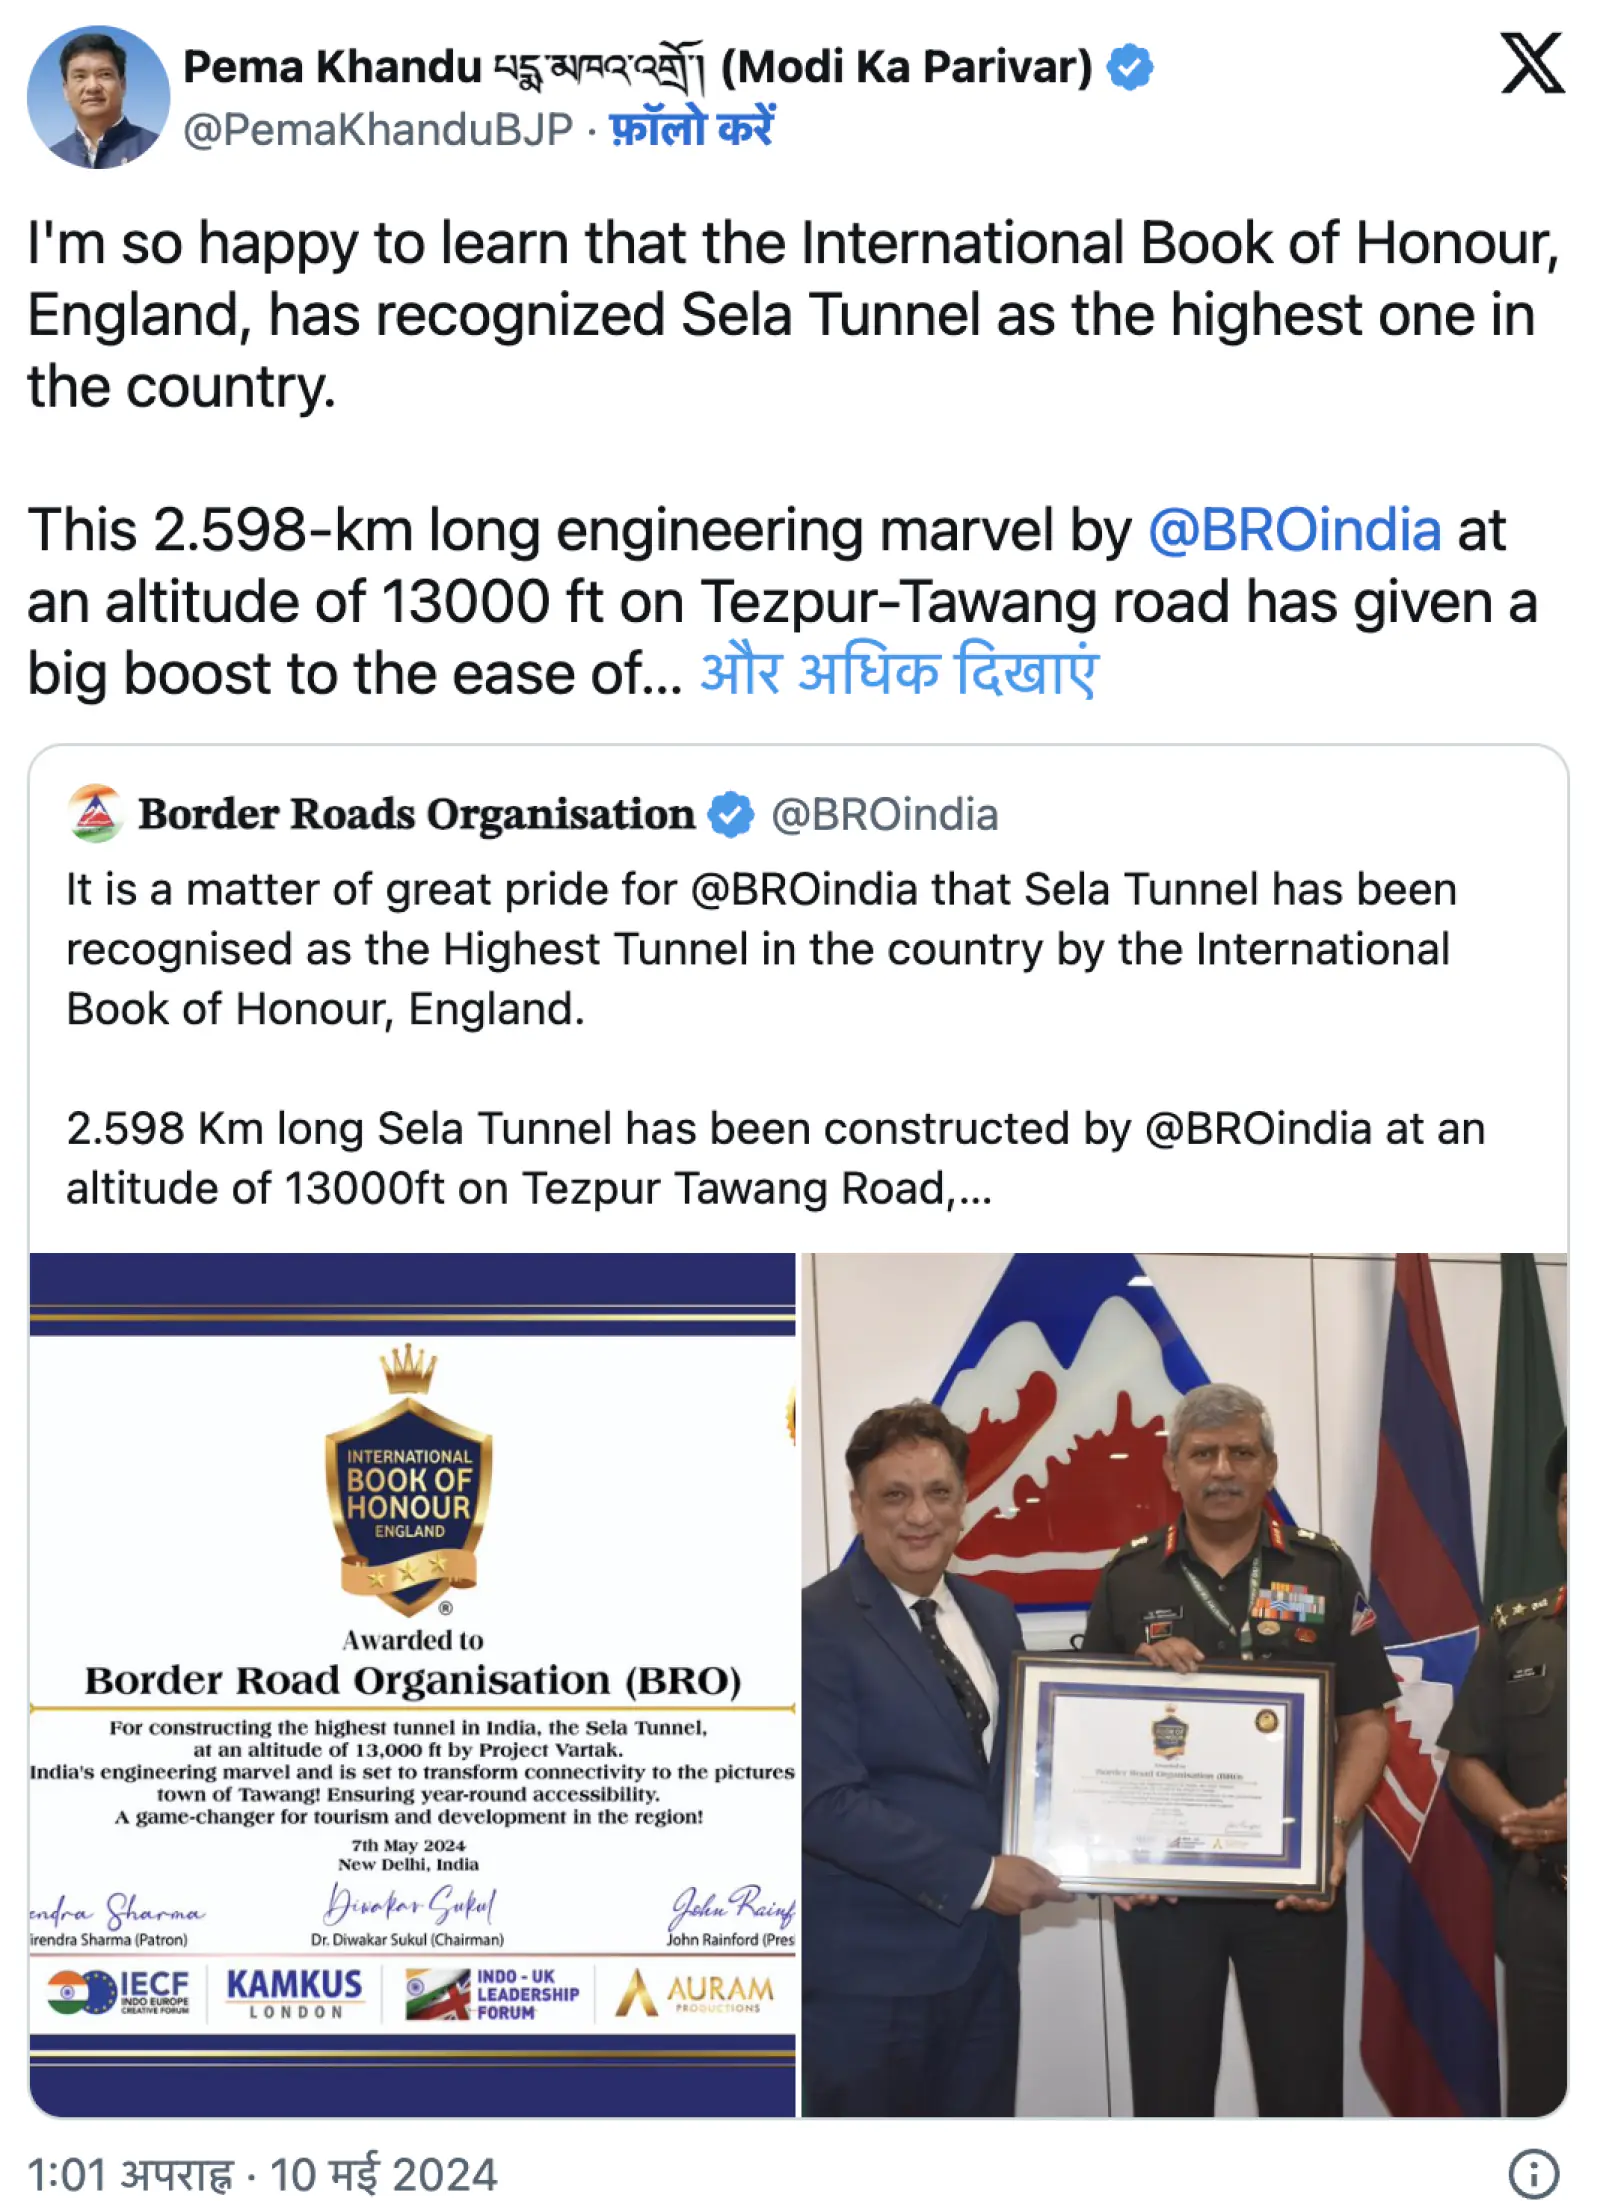 Sela Tunnel recognized by International Book of Honor, officially recognized as India's highest tunnel